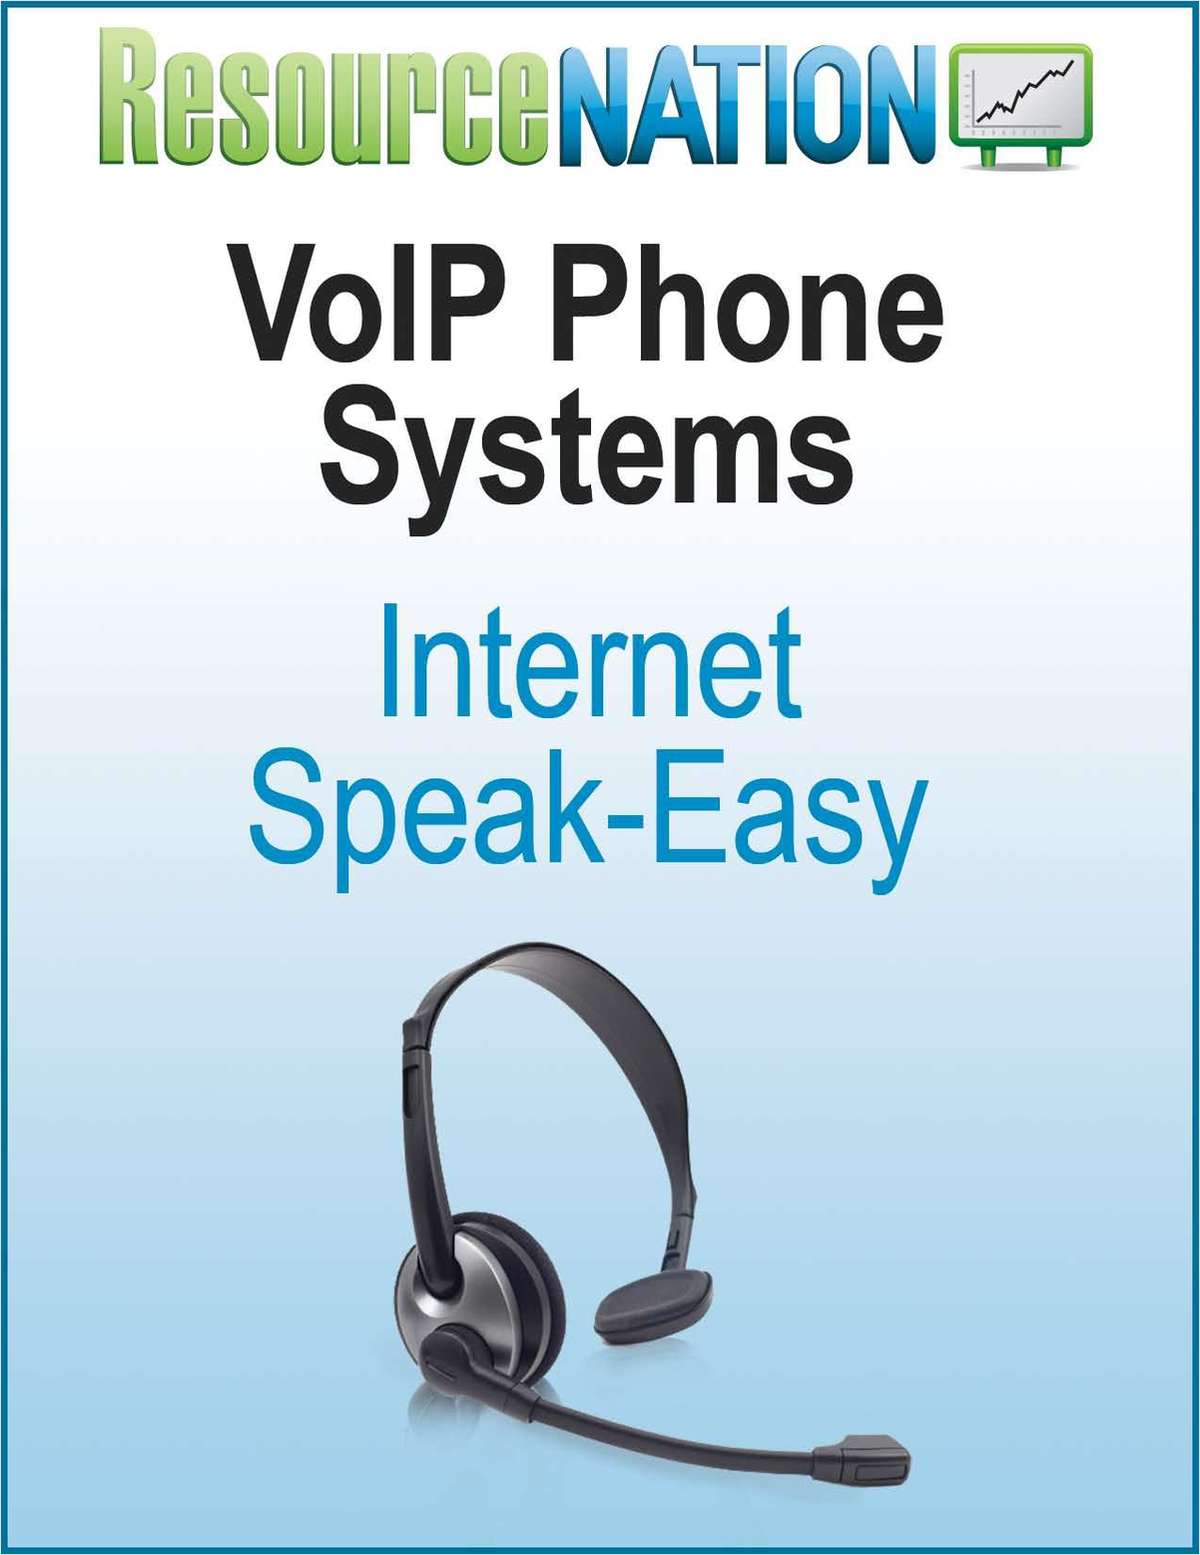 Proven Methods for Businesses to Save with VoIP Phone Systems